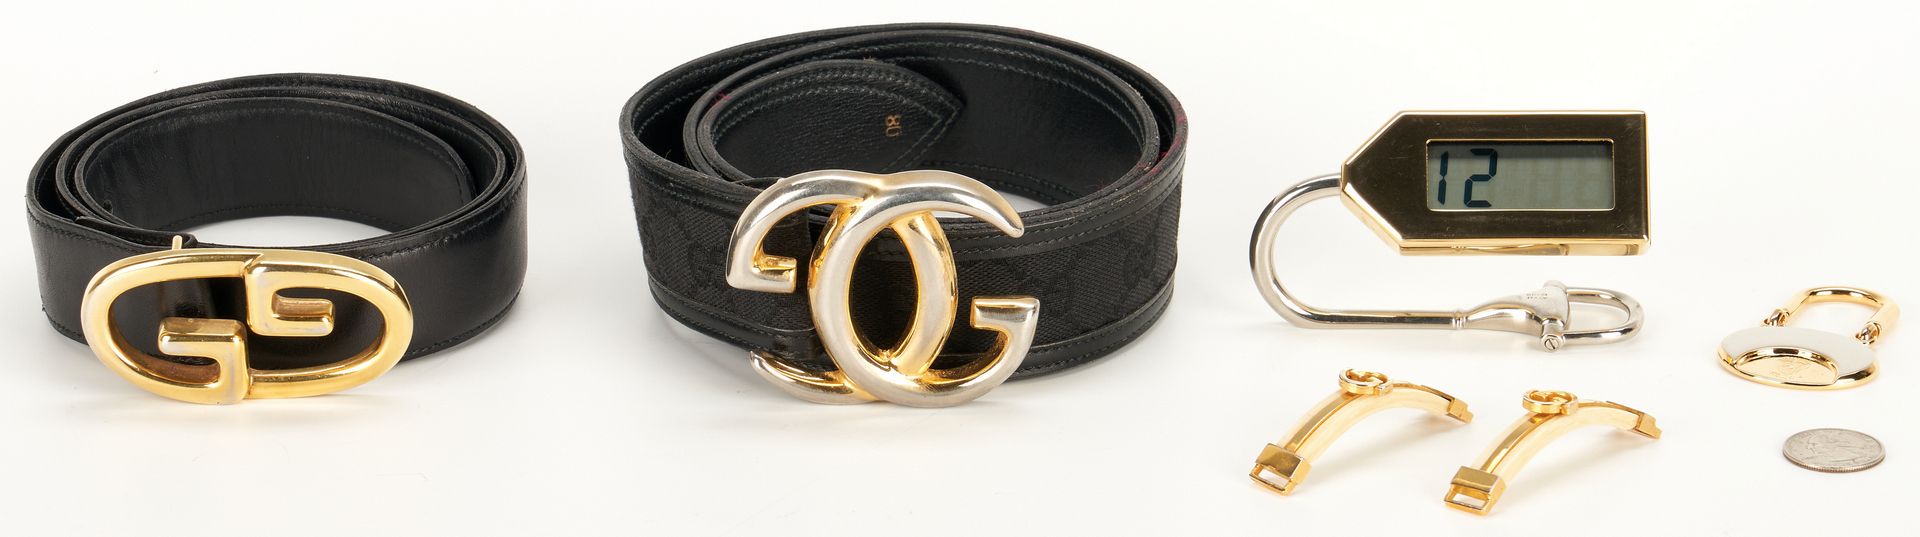 Lot 1028: 8 Gucci items, incl. belts, promotional items